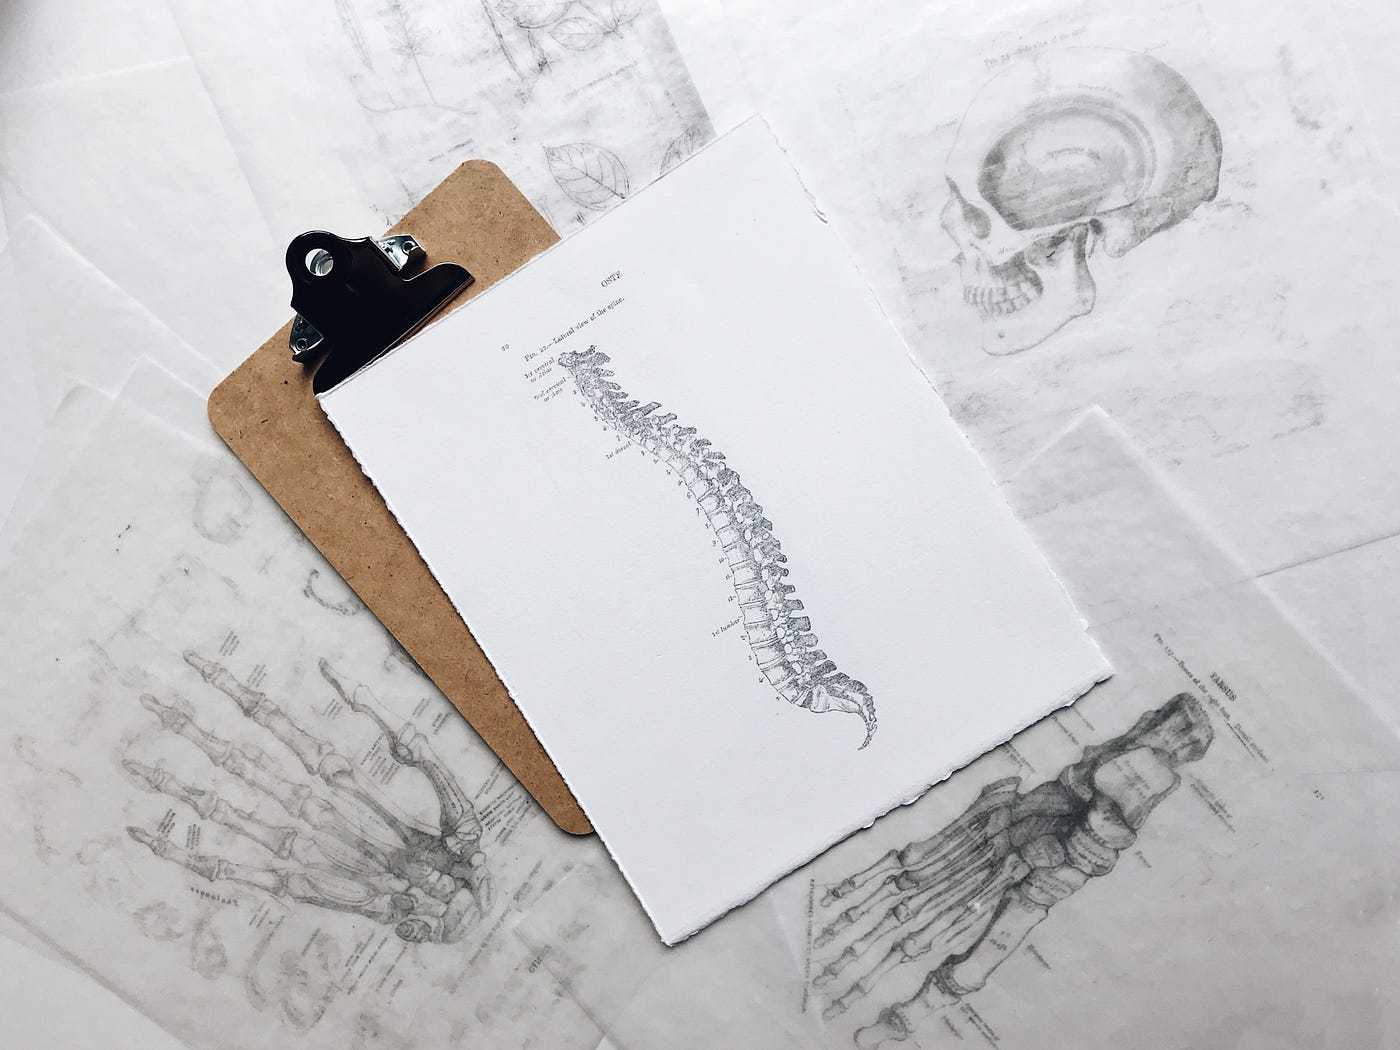 A drawing of the spine, as seen from the side, sits on a white piece of paper. The paper rests on a wooden clipboard, which in turn is on papers with drawings of various skeletal body parts.